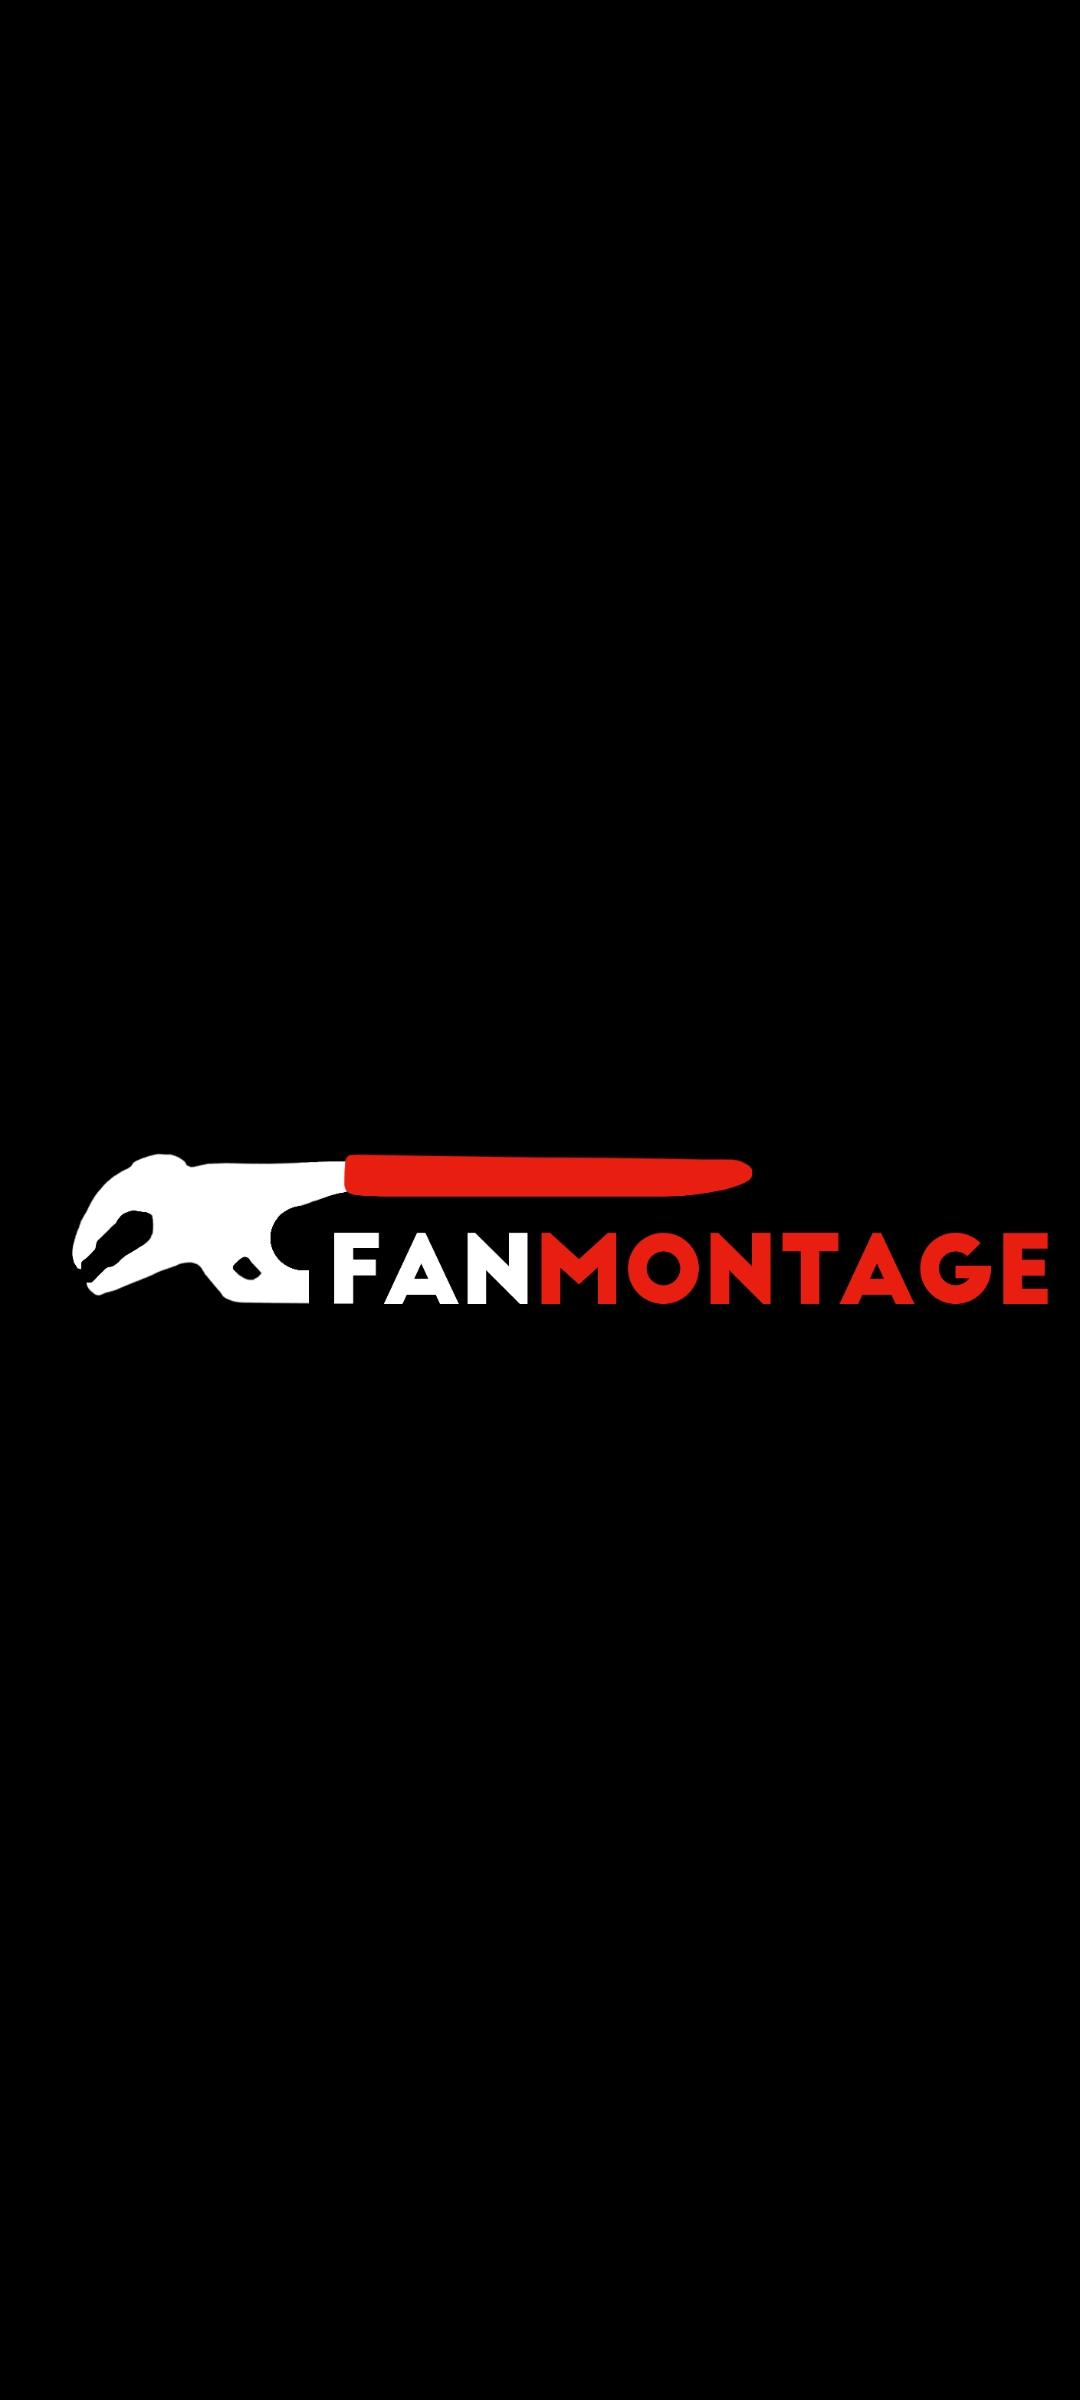 Fanmontage